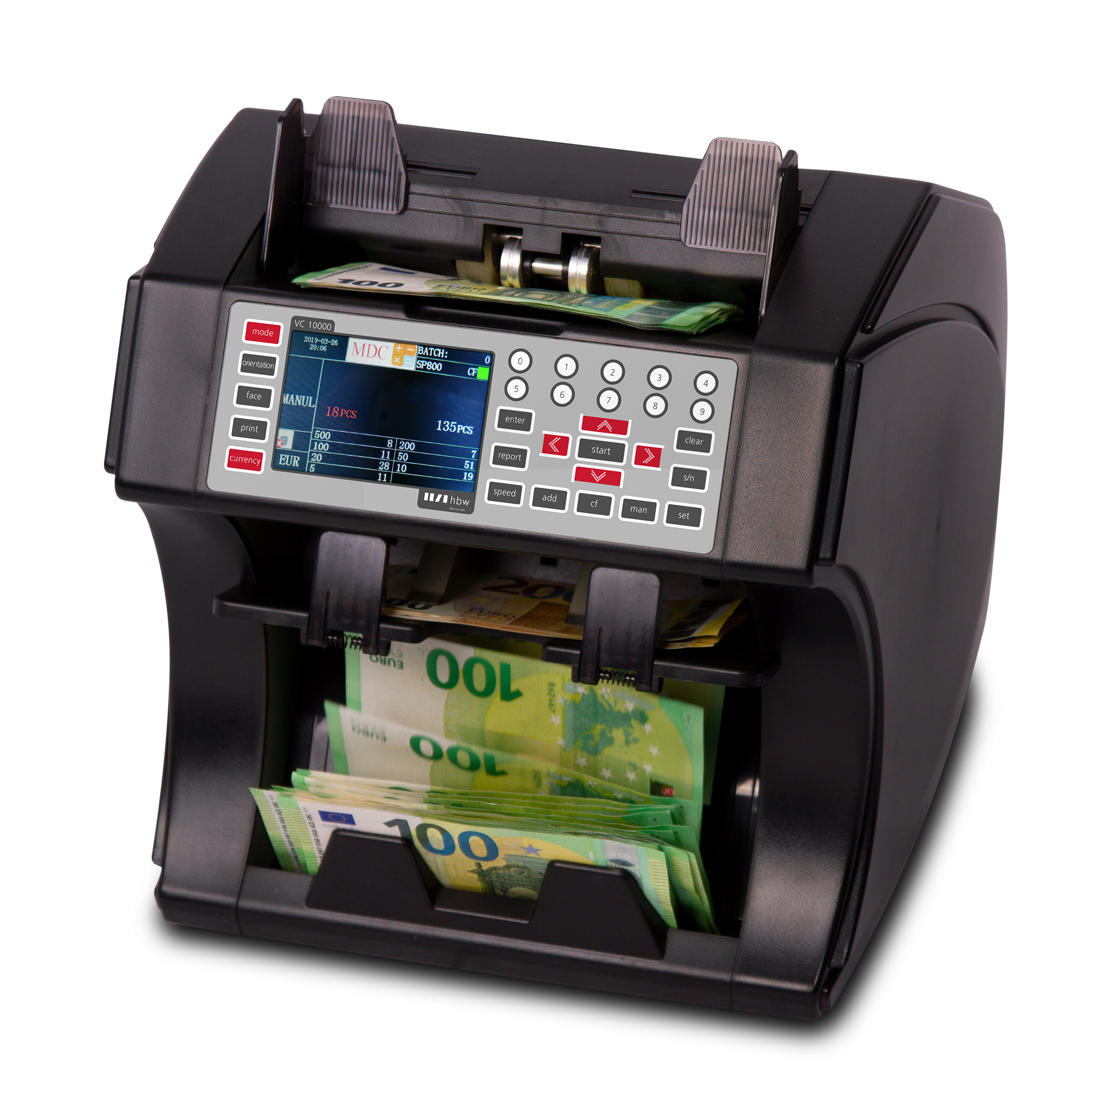 Banknote counters hbw VC 10000 Euro